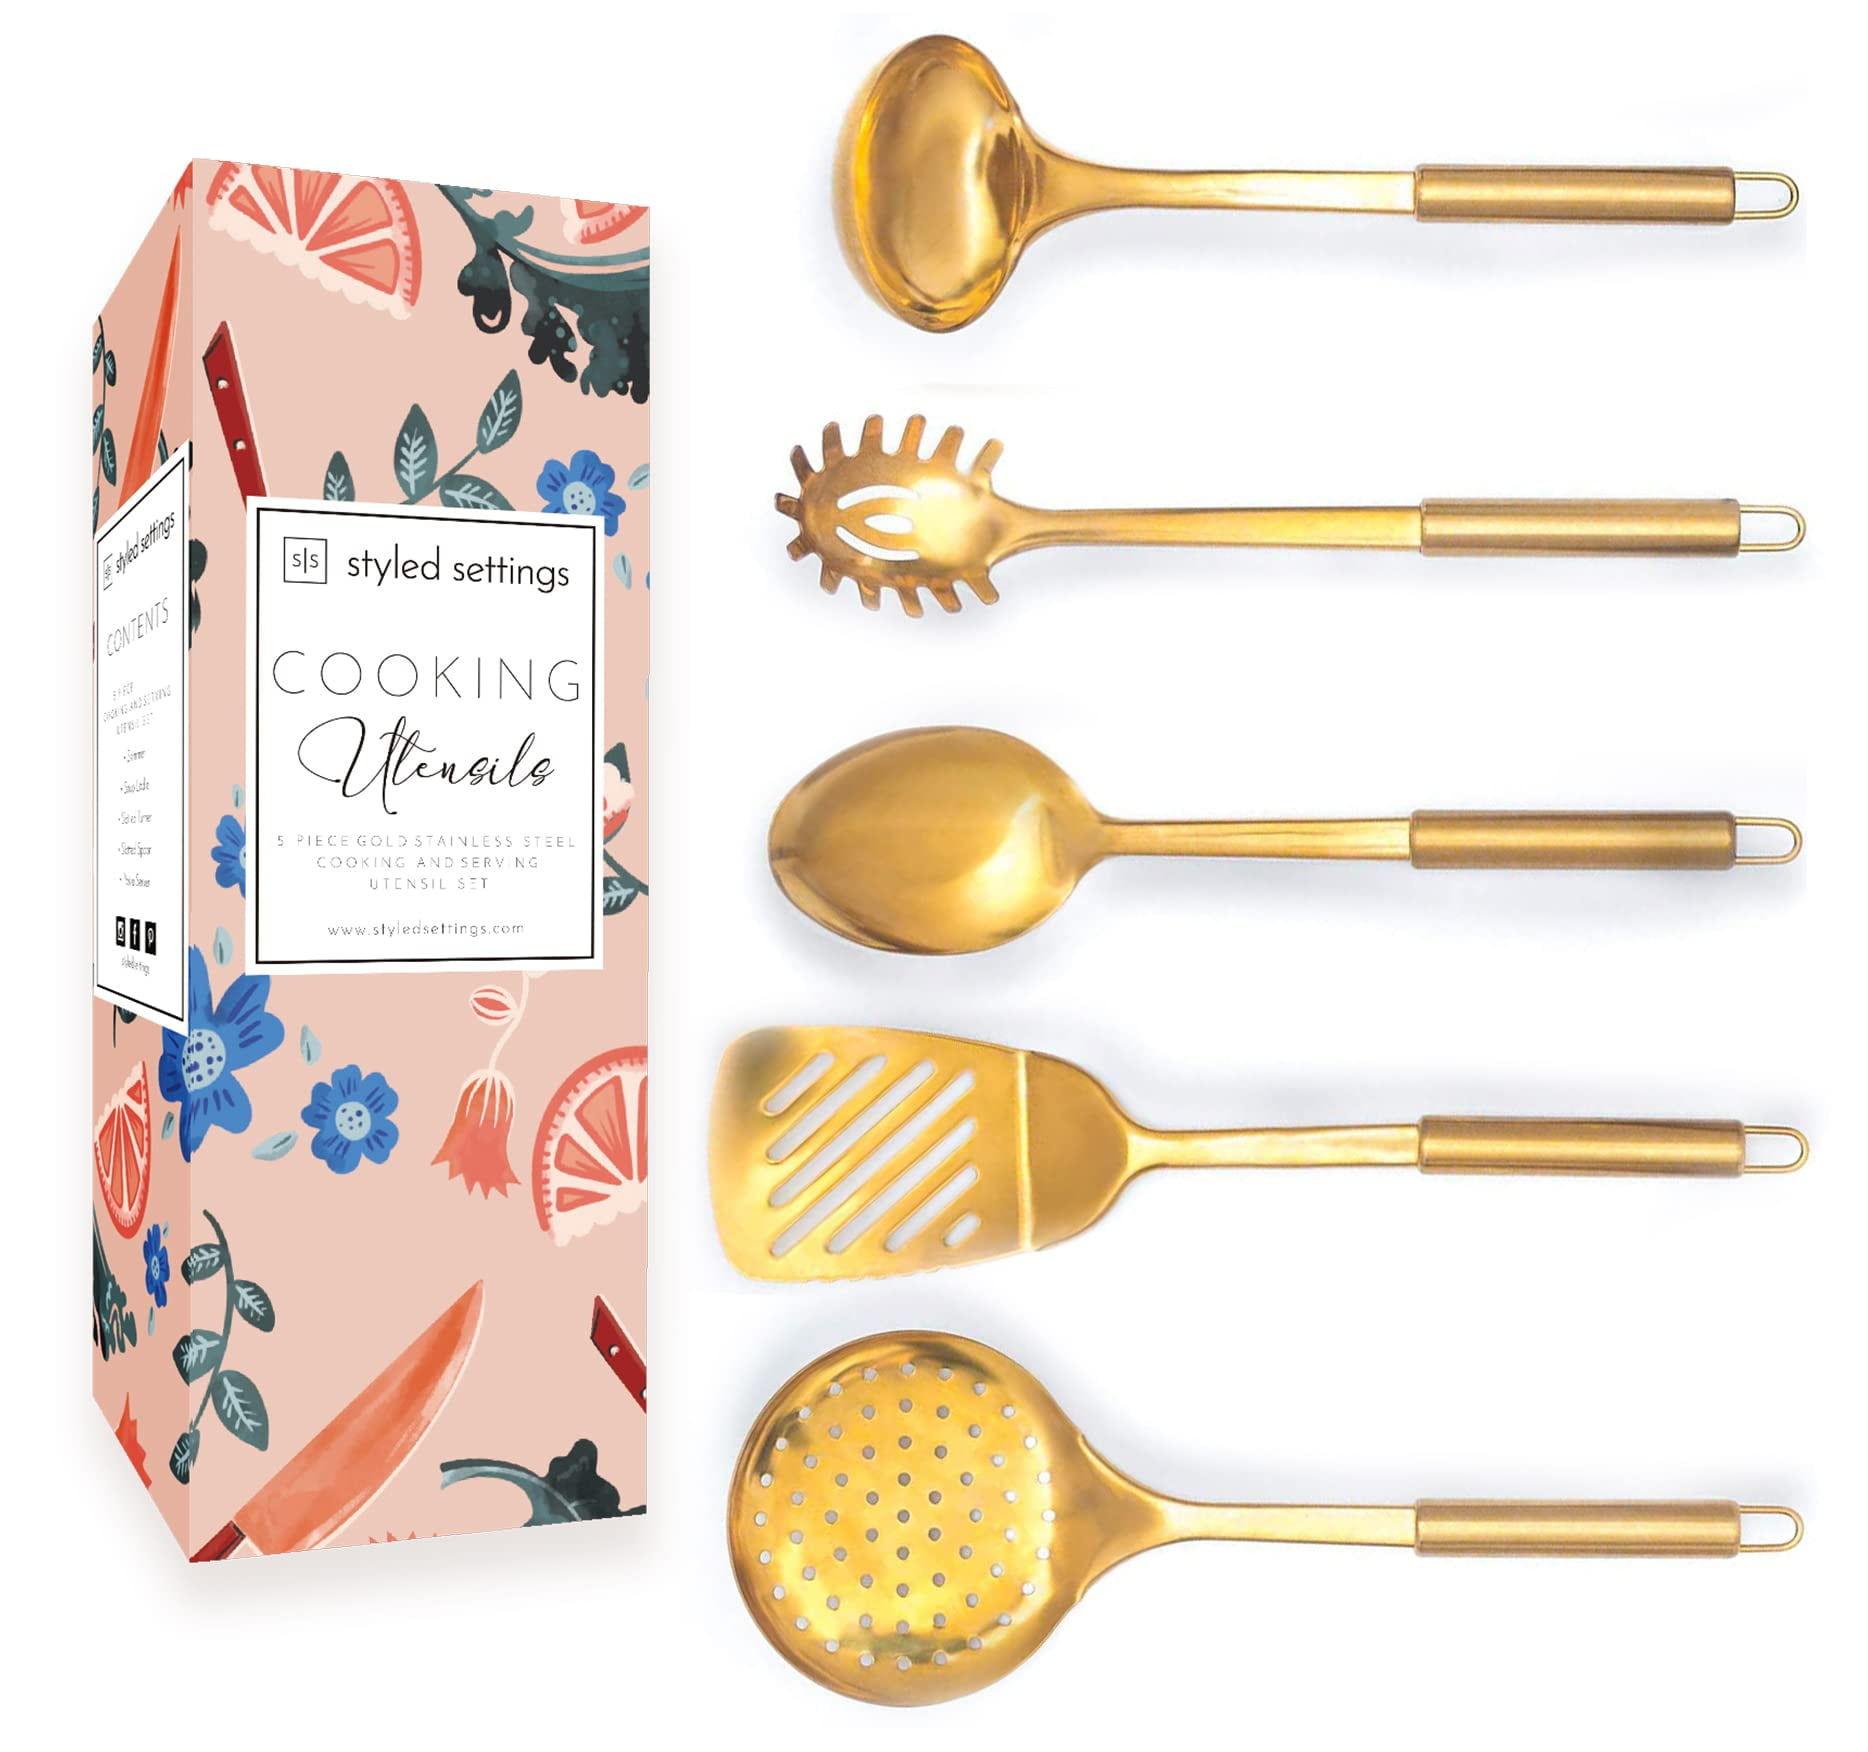 Reanea Gold Cooking Utensils Set Stainless Steel 37 Pieces Kitchen Utensils Set Kitchen Tools Gadgets Set with Hooks, Size: 17.01 x 5.28 x 4.92